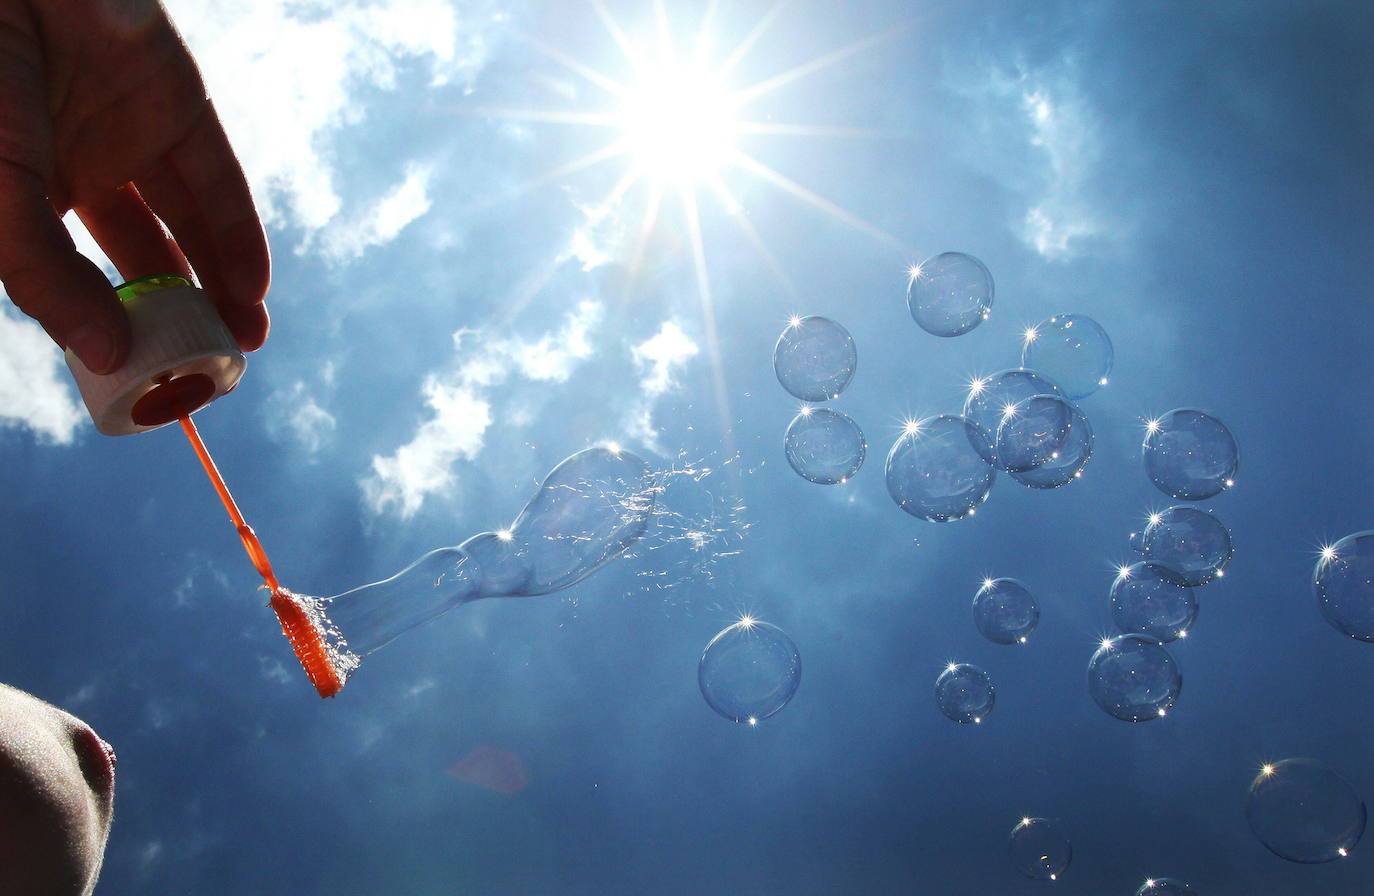 Science’s fascination with soap bubbles